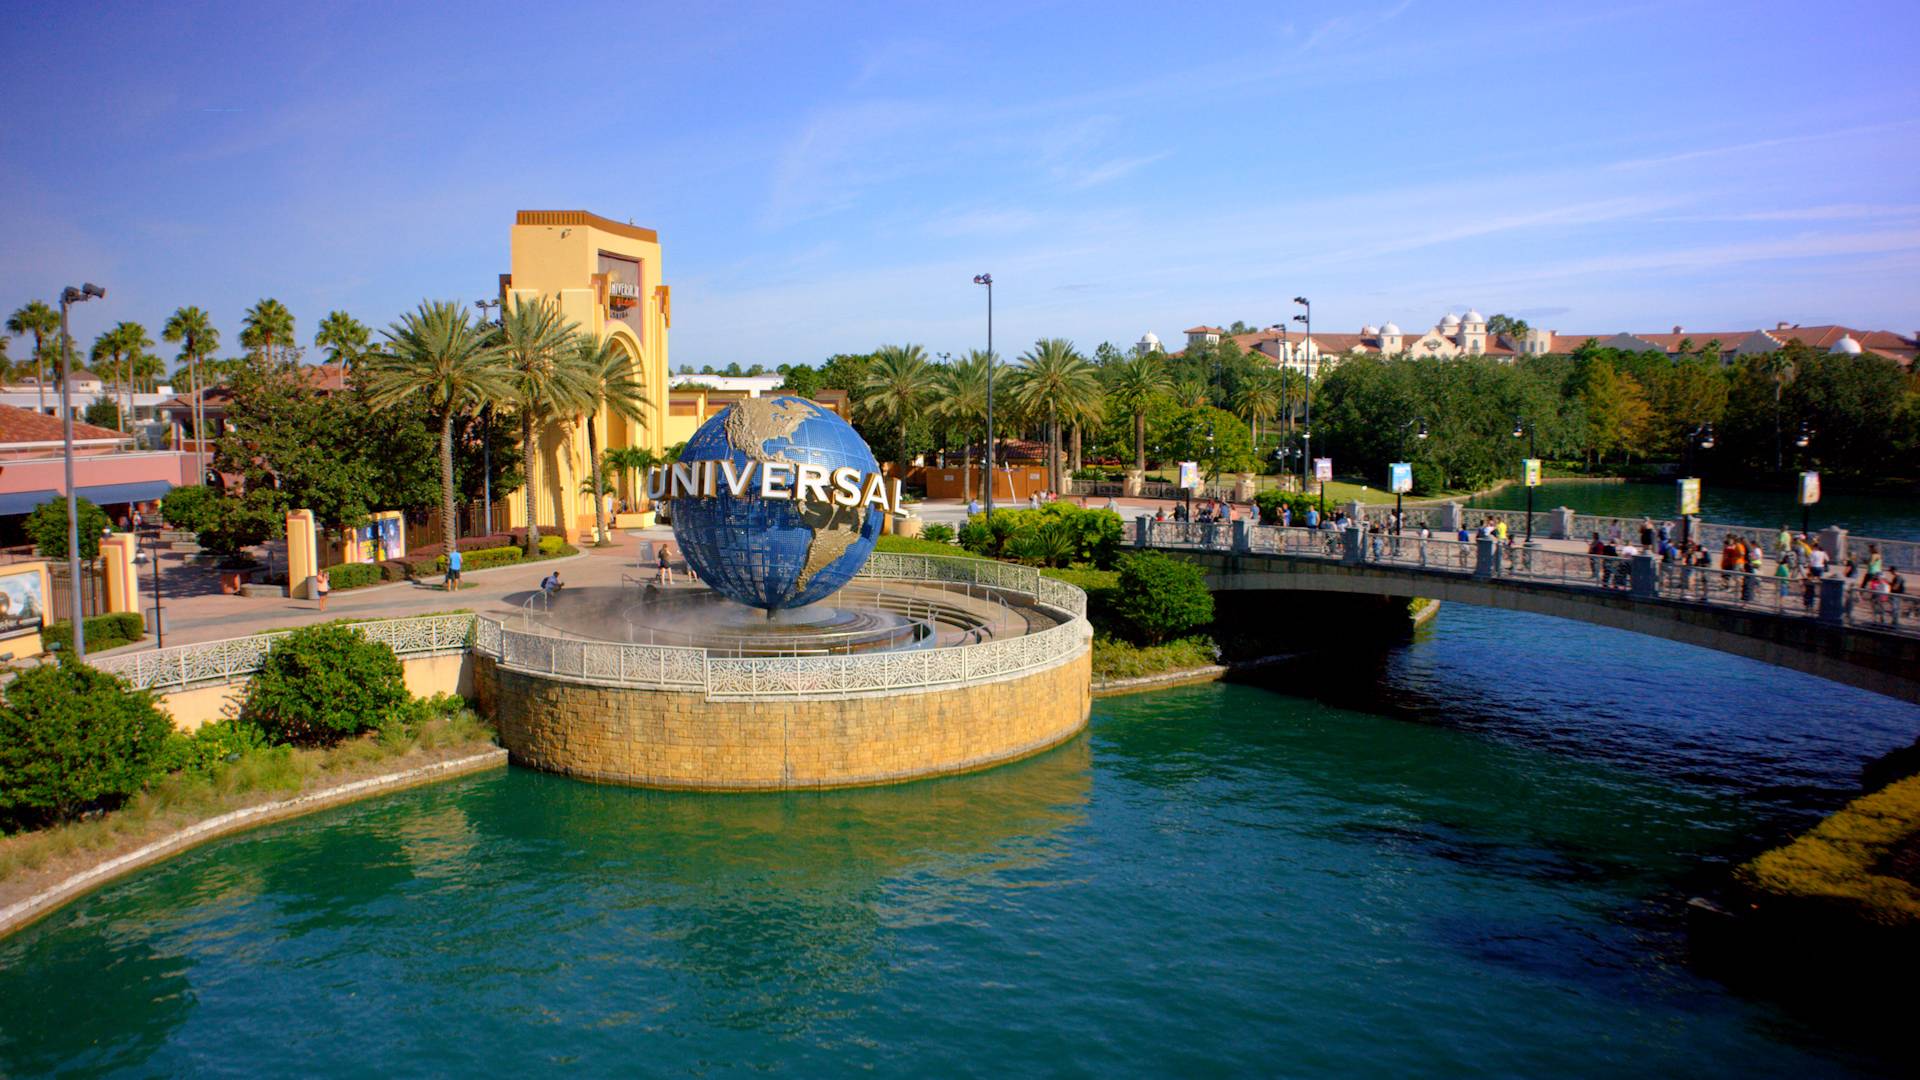 ©2021 Universal Orlando. All Rights Reserved.